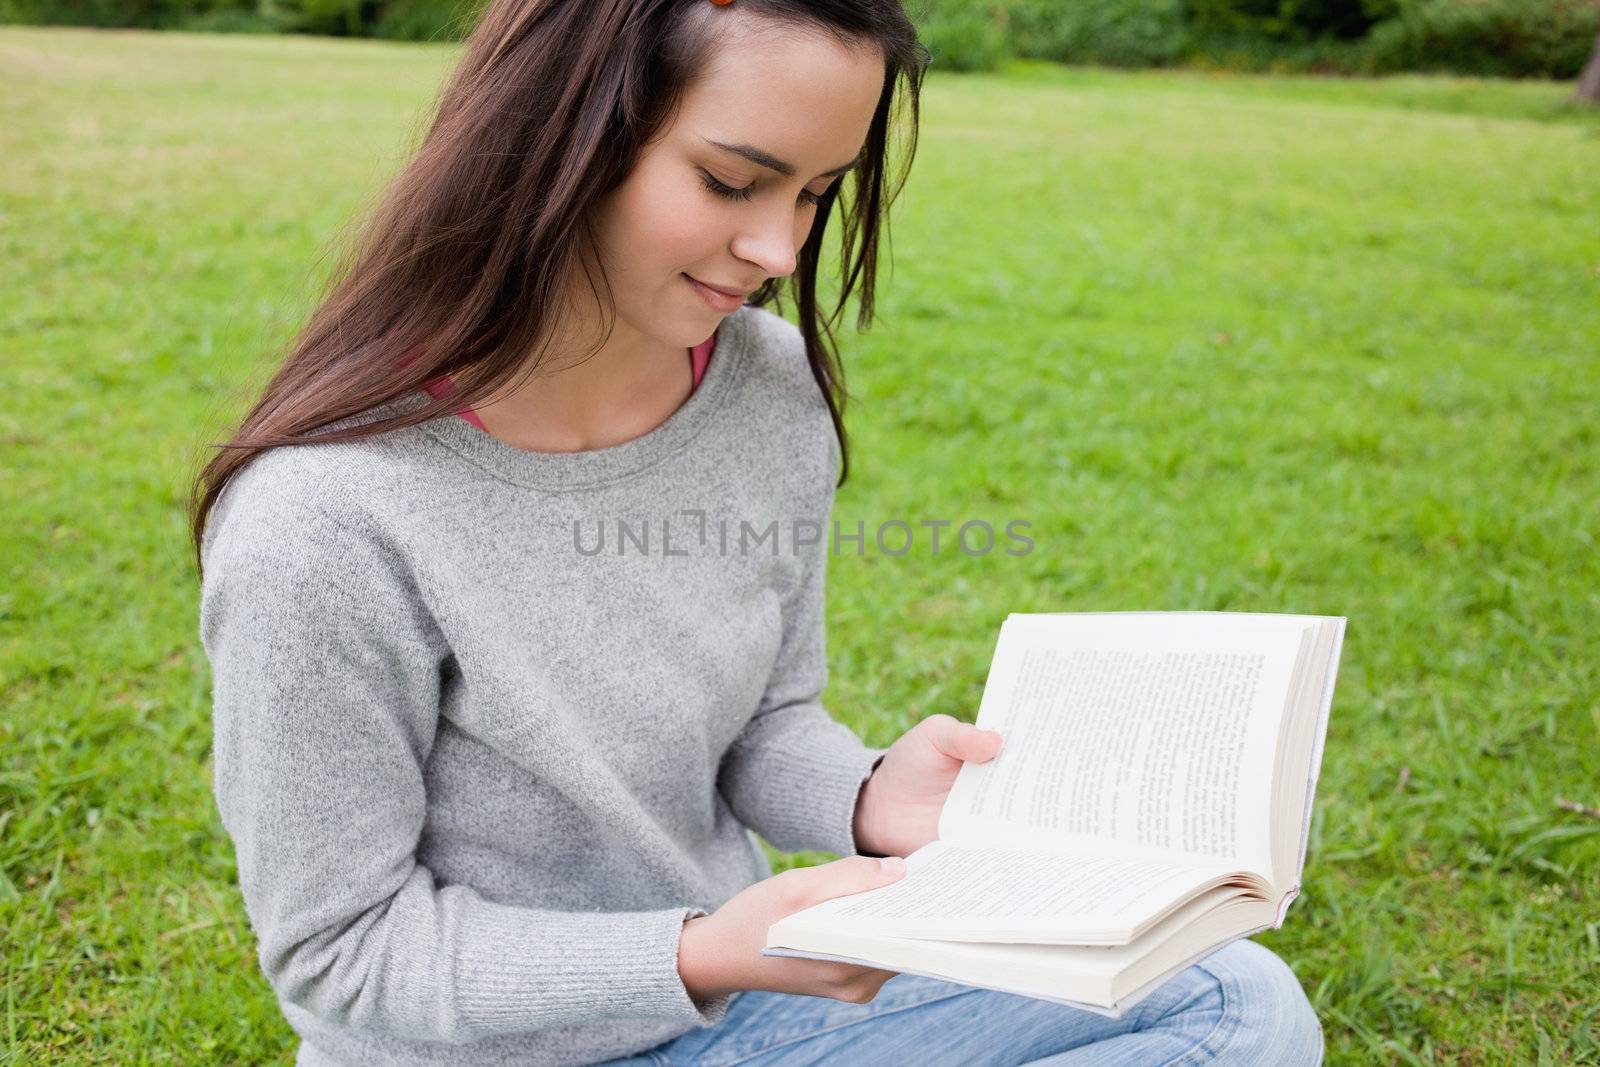 Young relaxed girl attentively reading a book while sitting down in a parkland